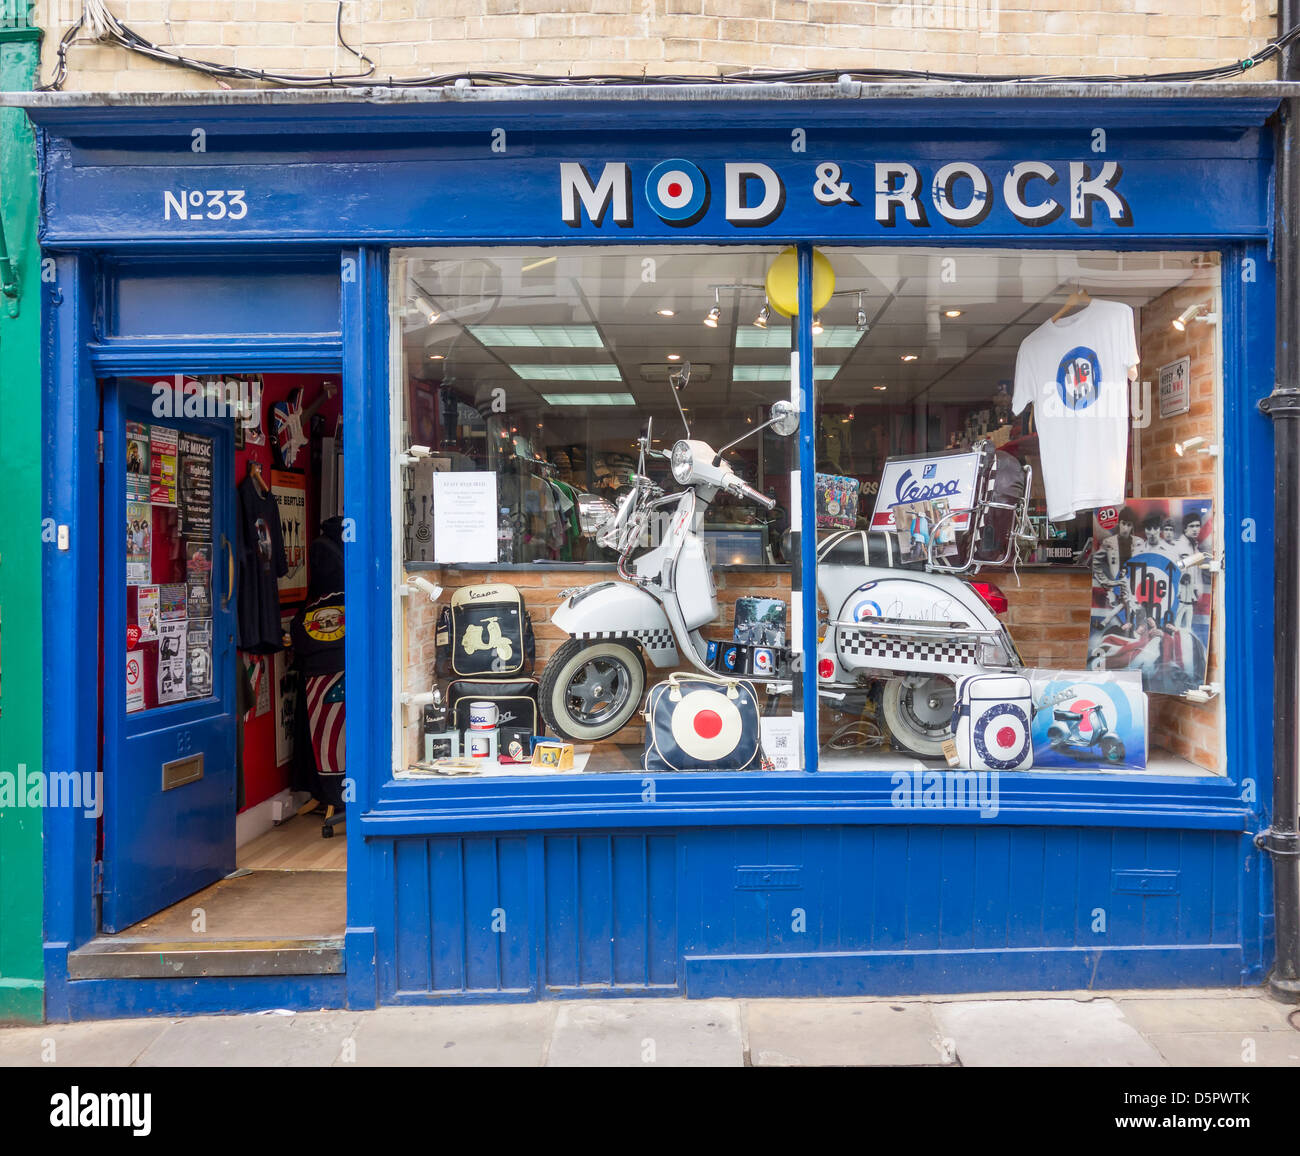 Mods and Rockers 60s Revival Shop Mod and Rock Burgate Canterbury. Stockfoto